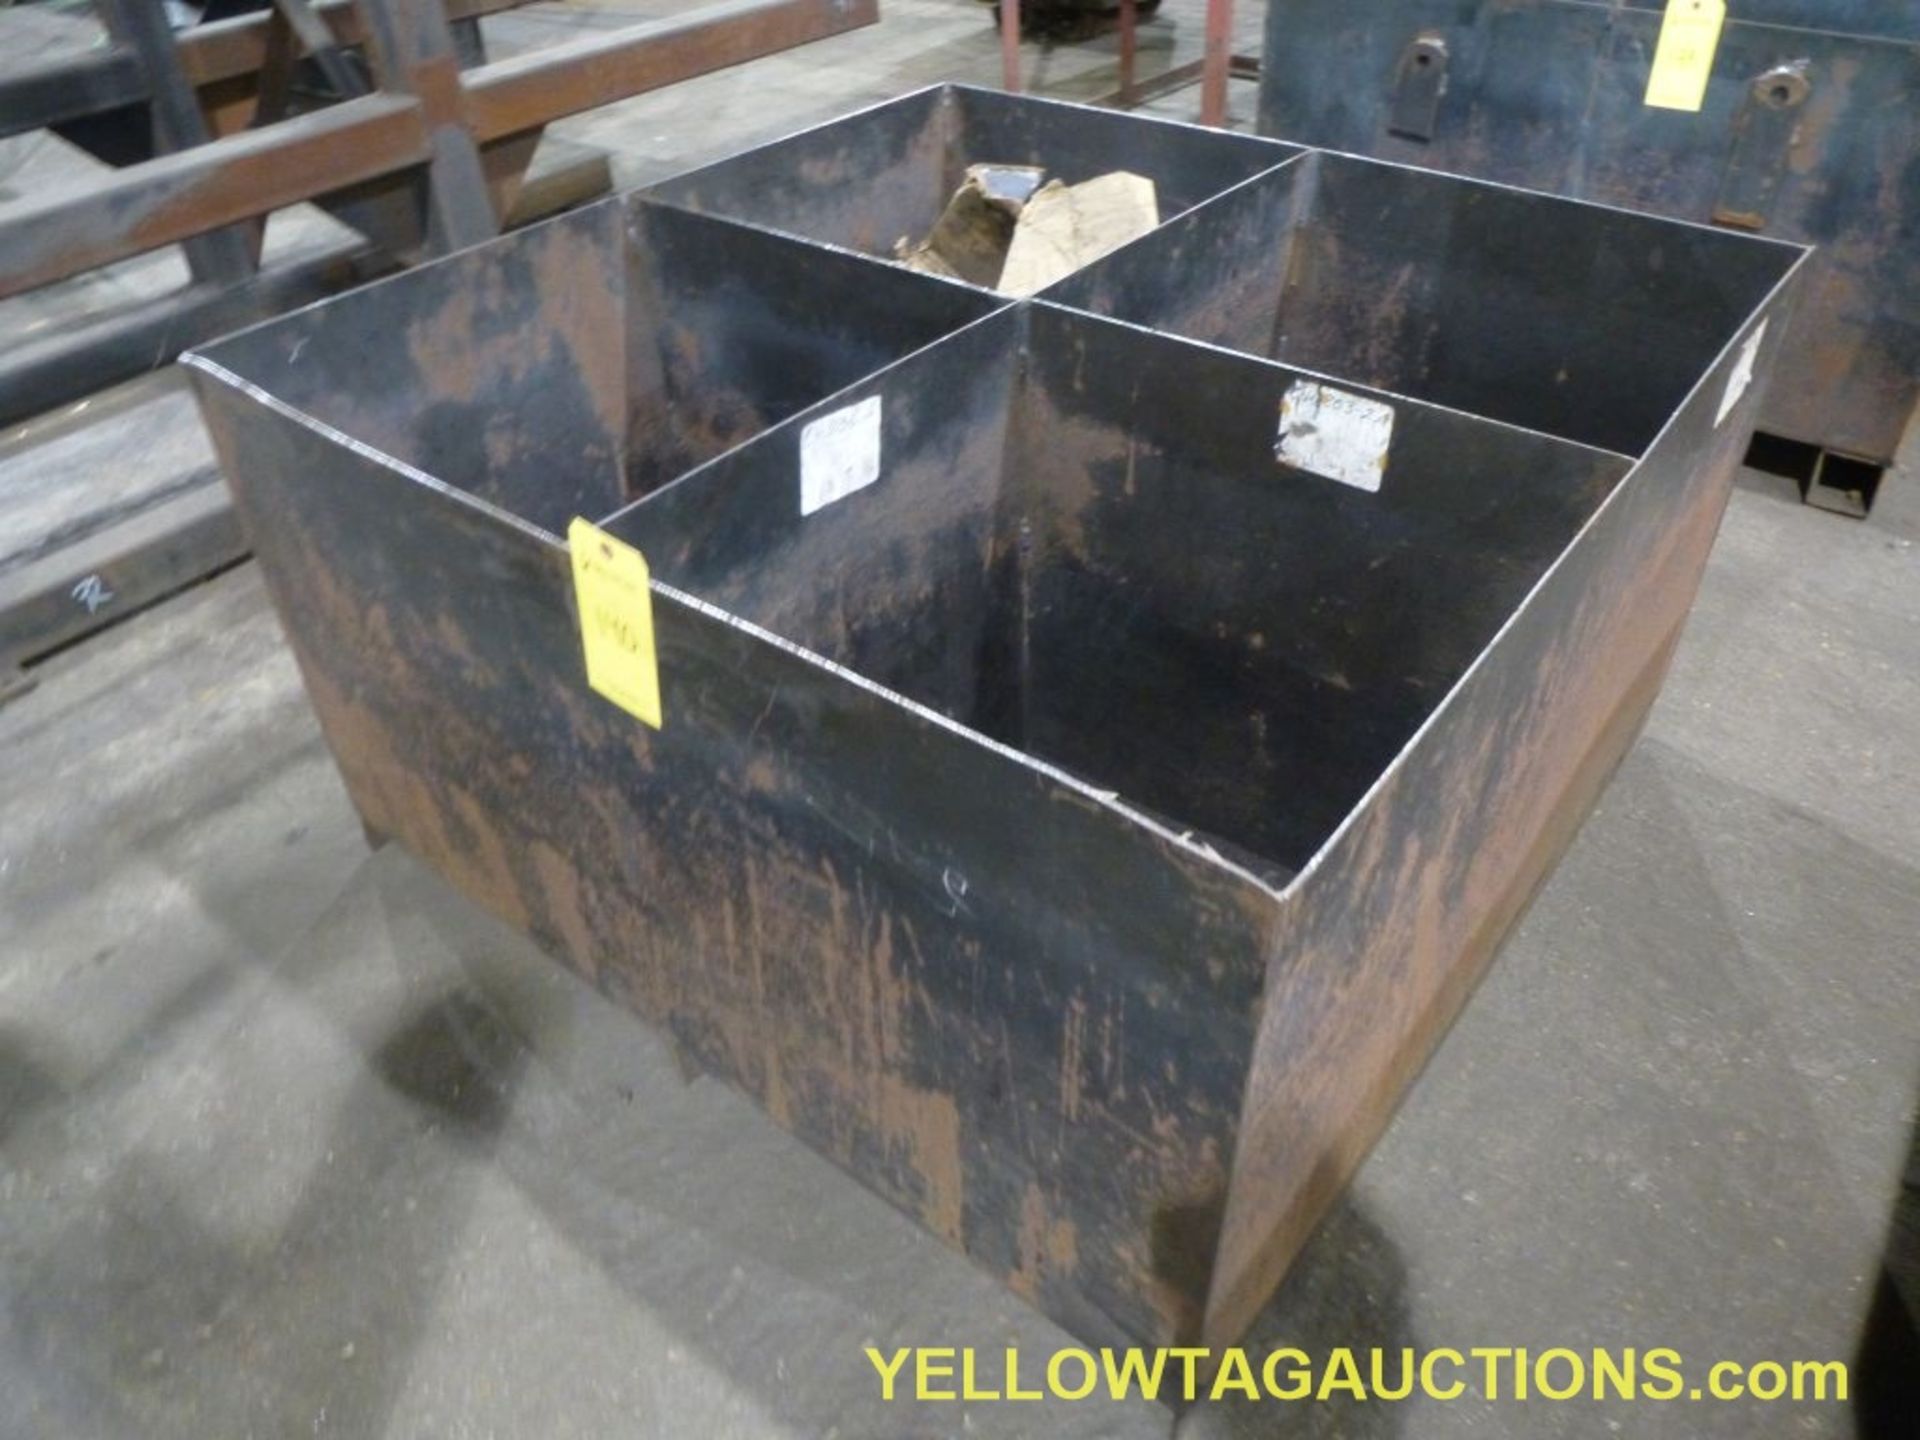 Lot of (1) 4-Section Parts Bin|Tag: 140